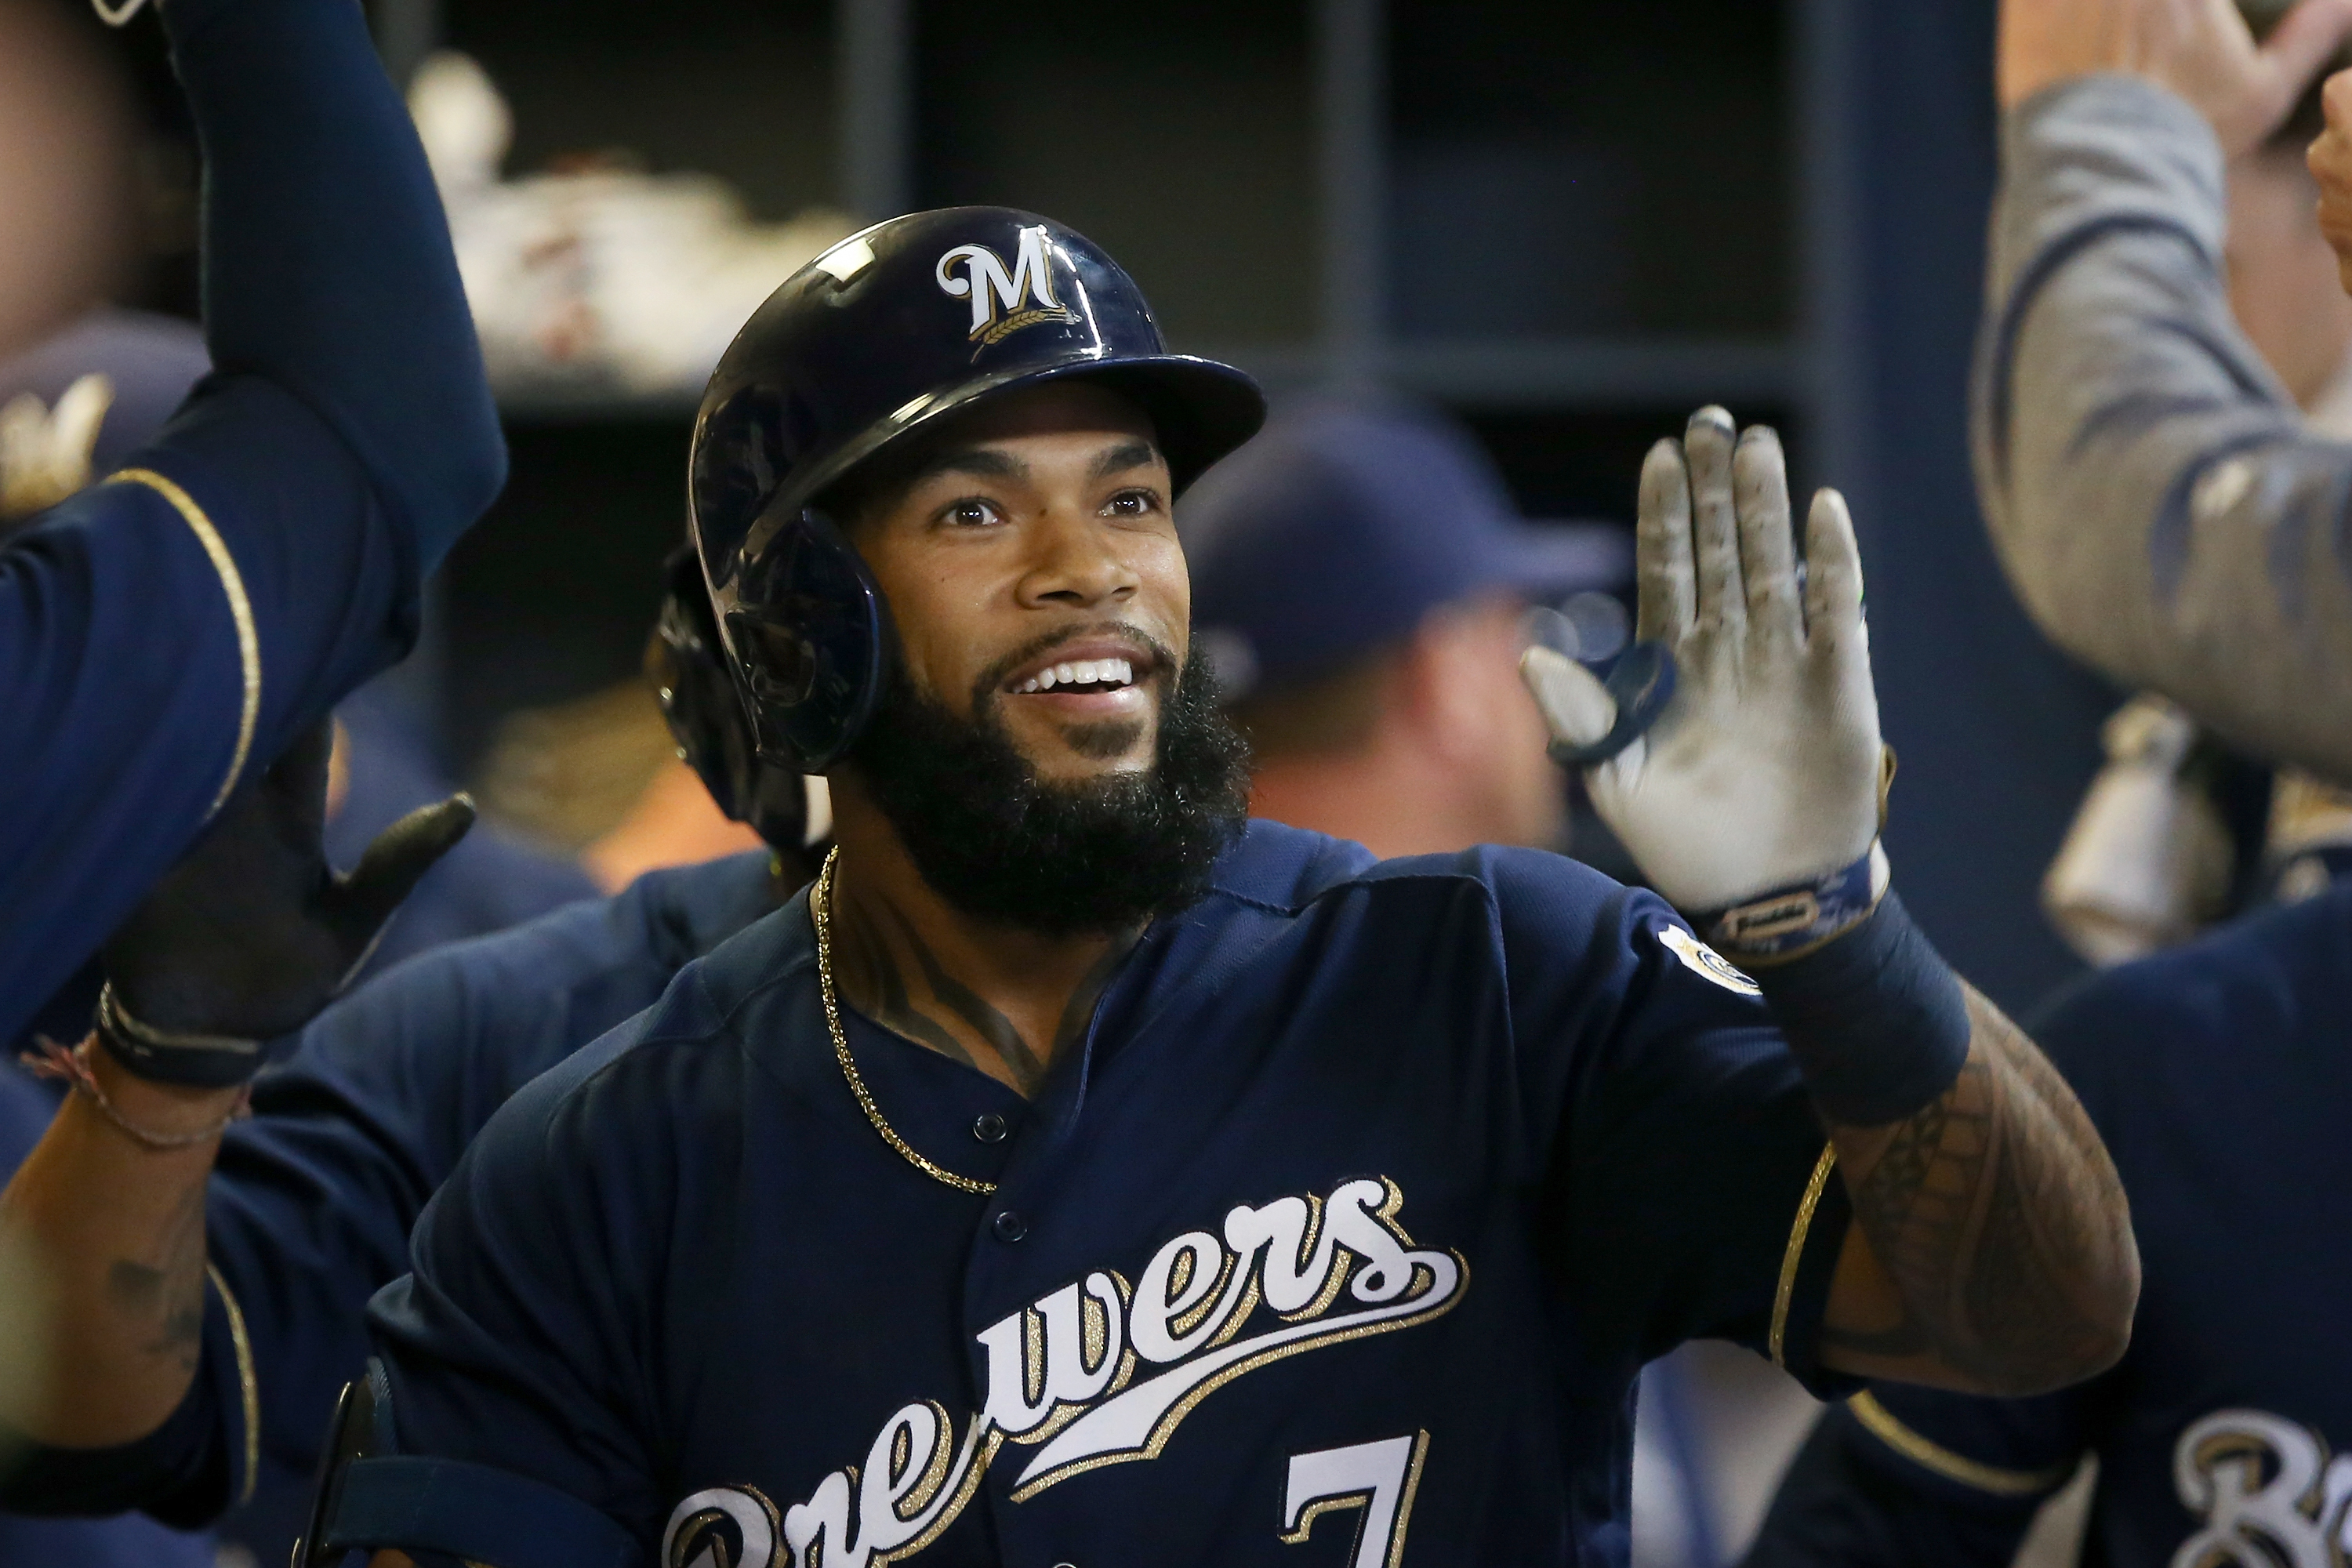 Powerful and Likable, Milwaukee Brewers' Eric Thames Is Quickly